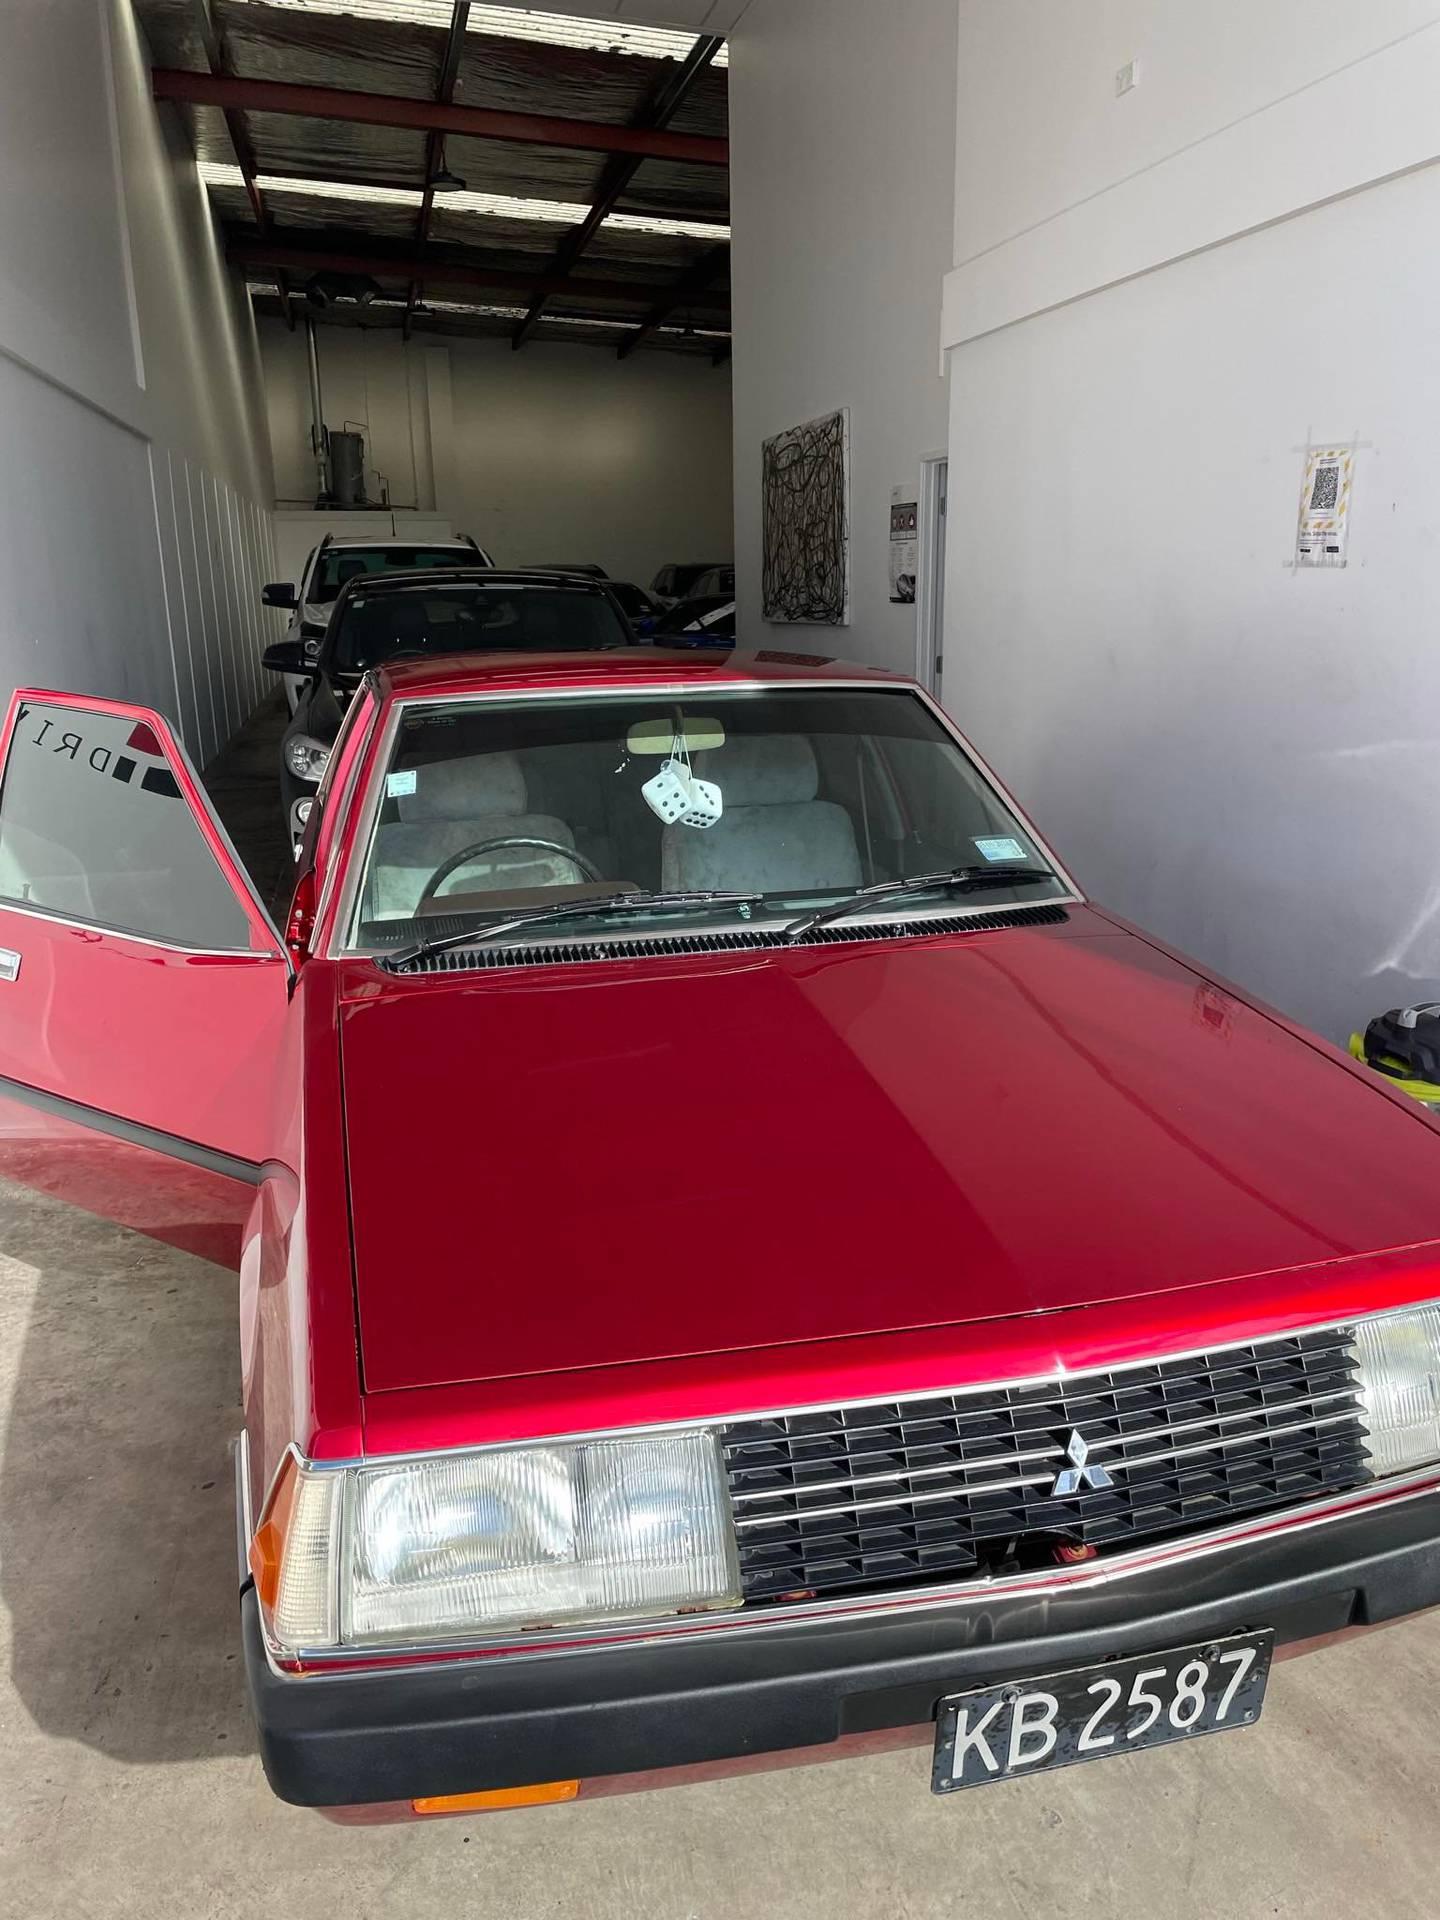 Logan Wilson-Bryant's rare 42-year-old Mitsubishi Sigma was stolen outside his apartment six hours after arriving home with his new purchase. Photo / Supplied